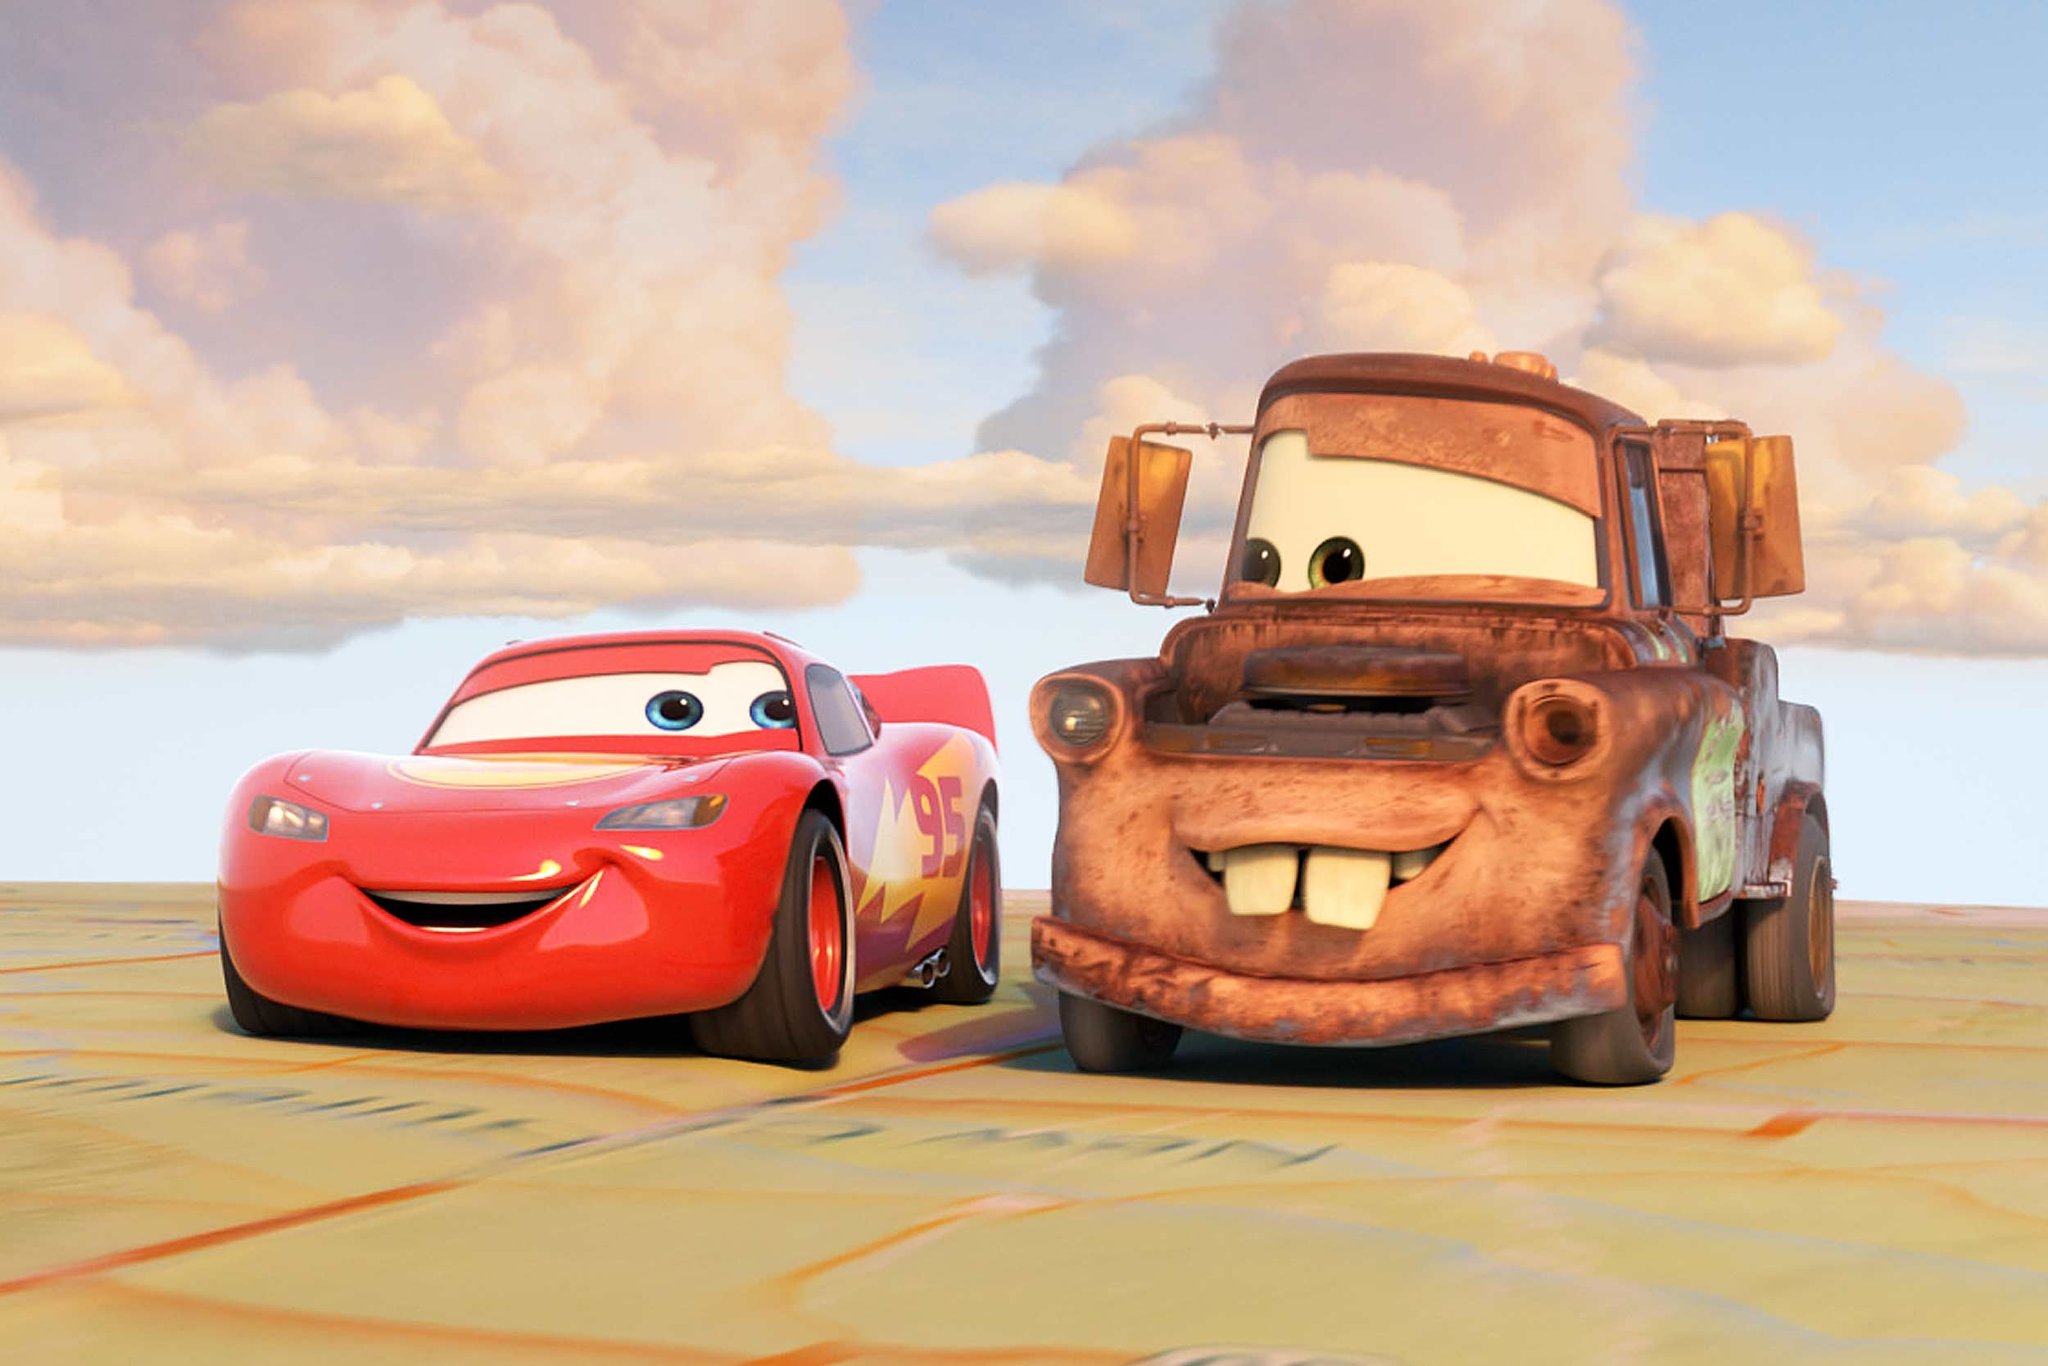 Pixar's Cars News And Updates on X: 'CARS ON THE ROAD' has been renewed  for Season 2.  / X